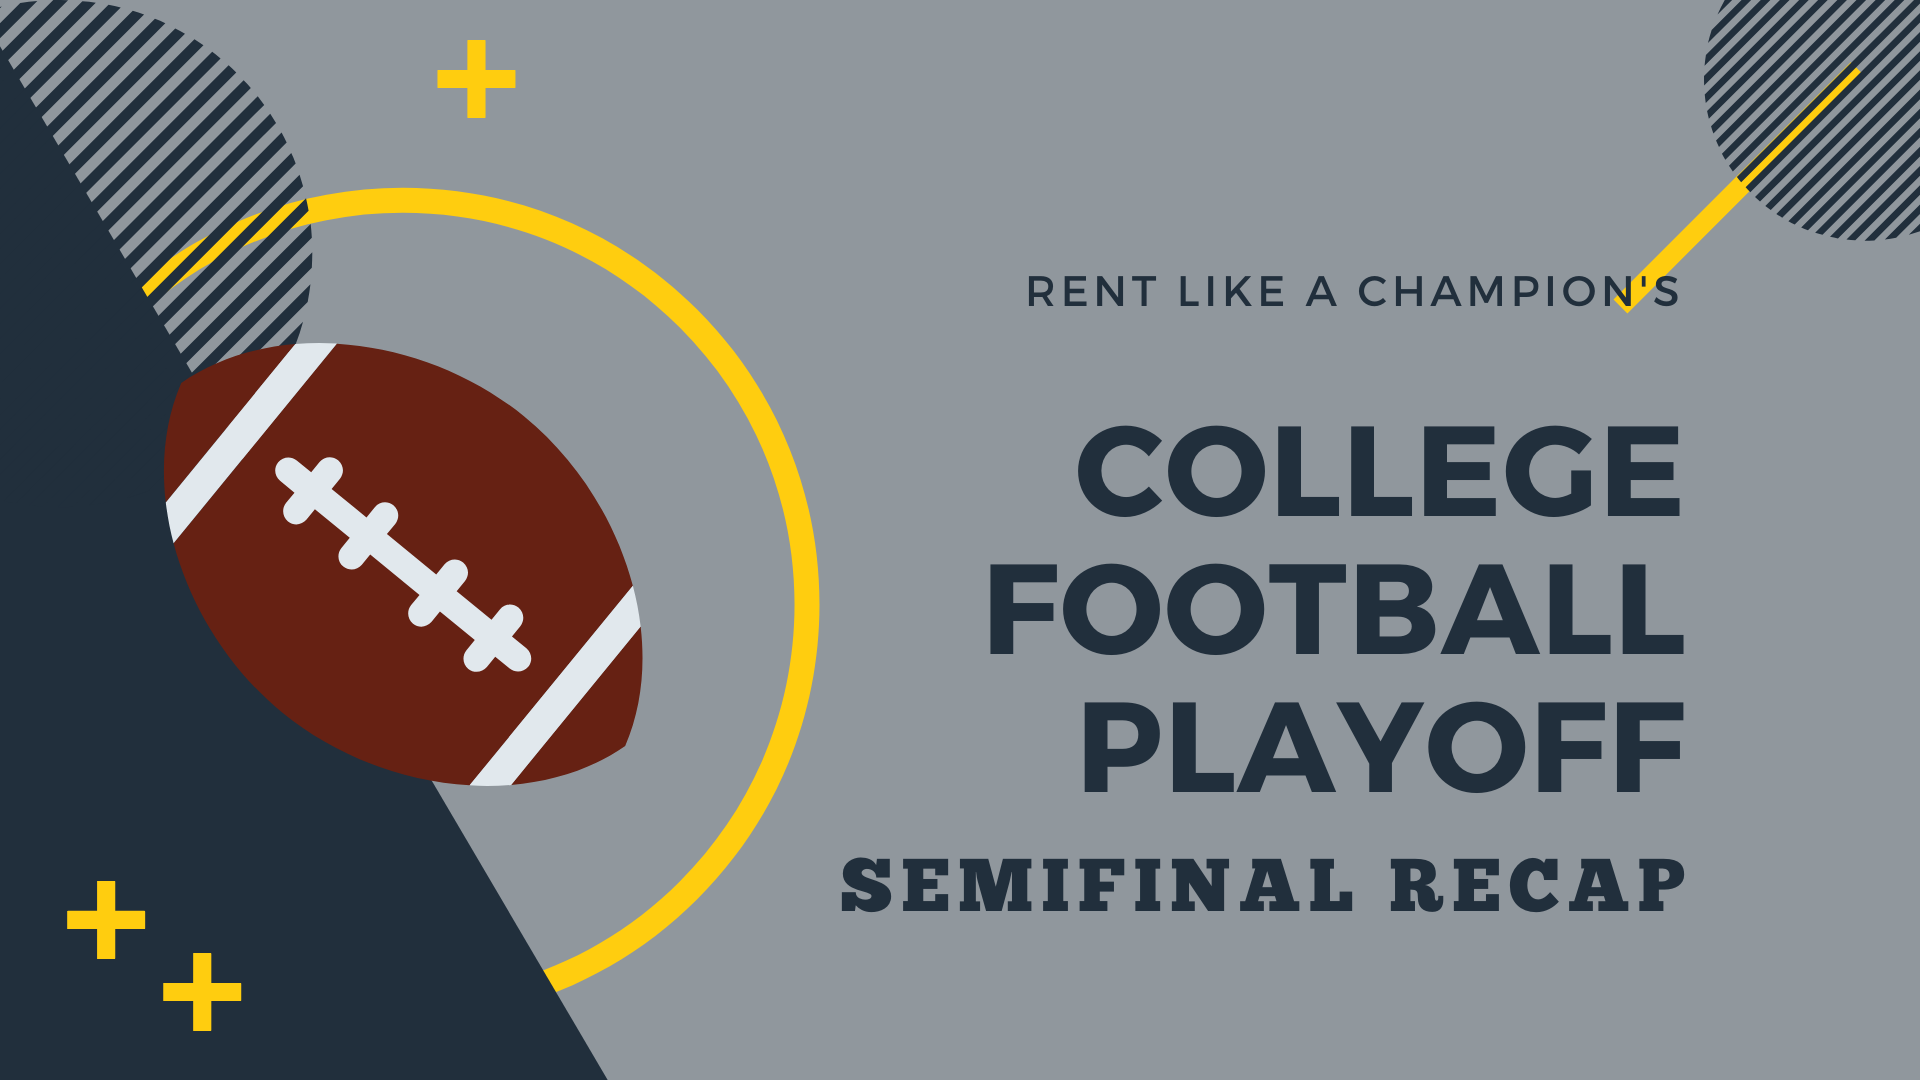 New Years Thoughts on the first round of CFP games